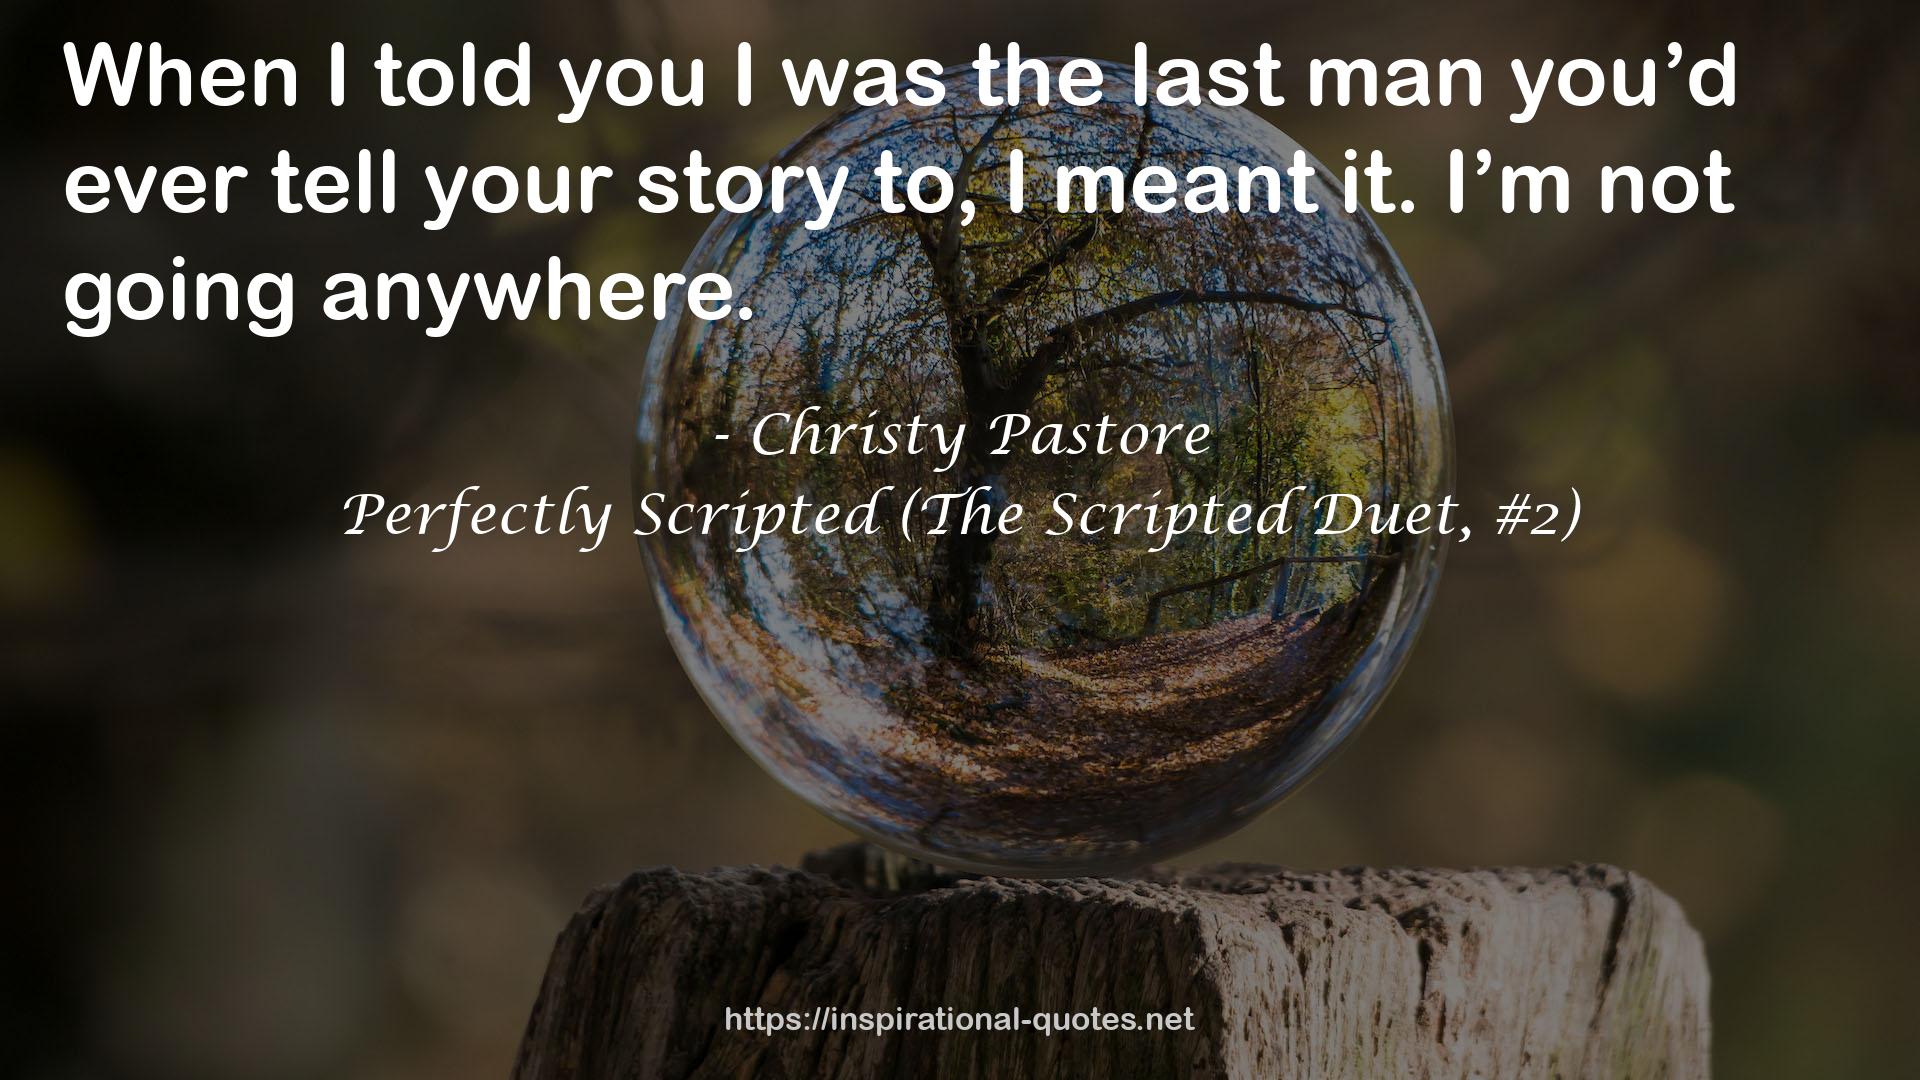 Perfectly Scripted (The Scripted Duet, #2) QUOTES